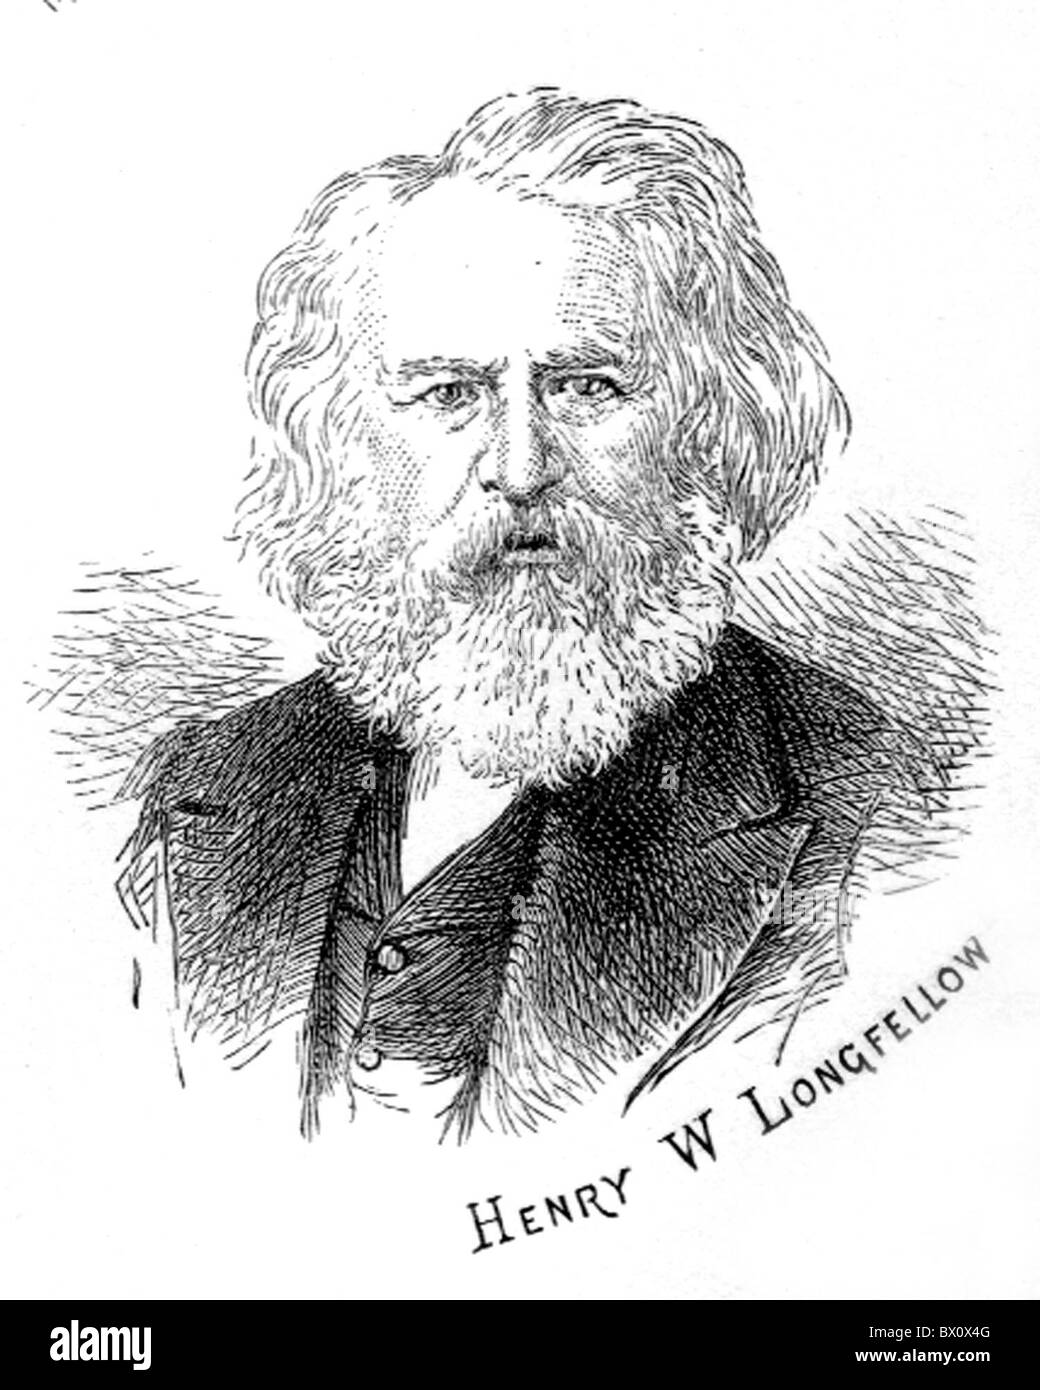 Archive image of historical literary figures. This is Henry W Longfellow. Stock Photo